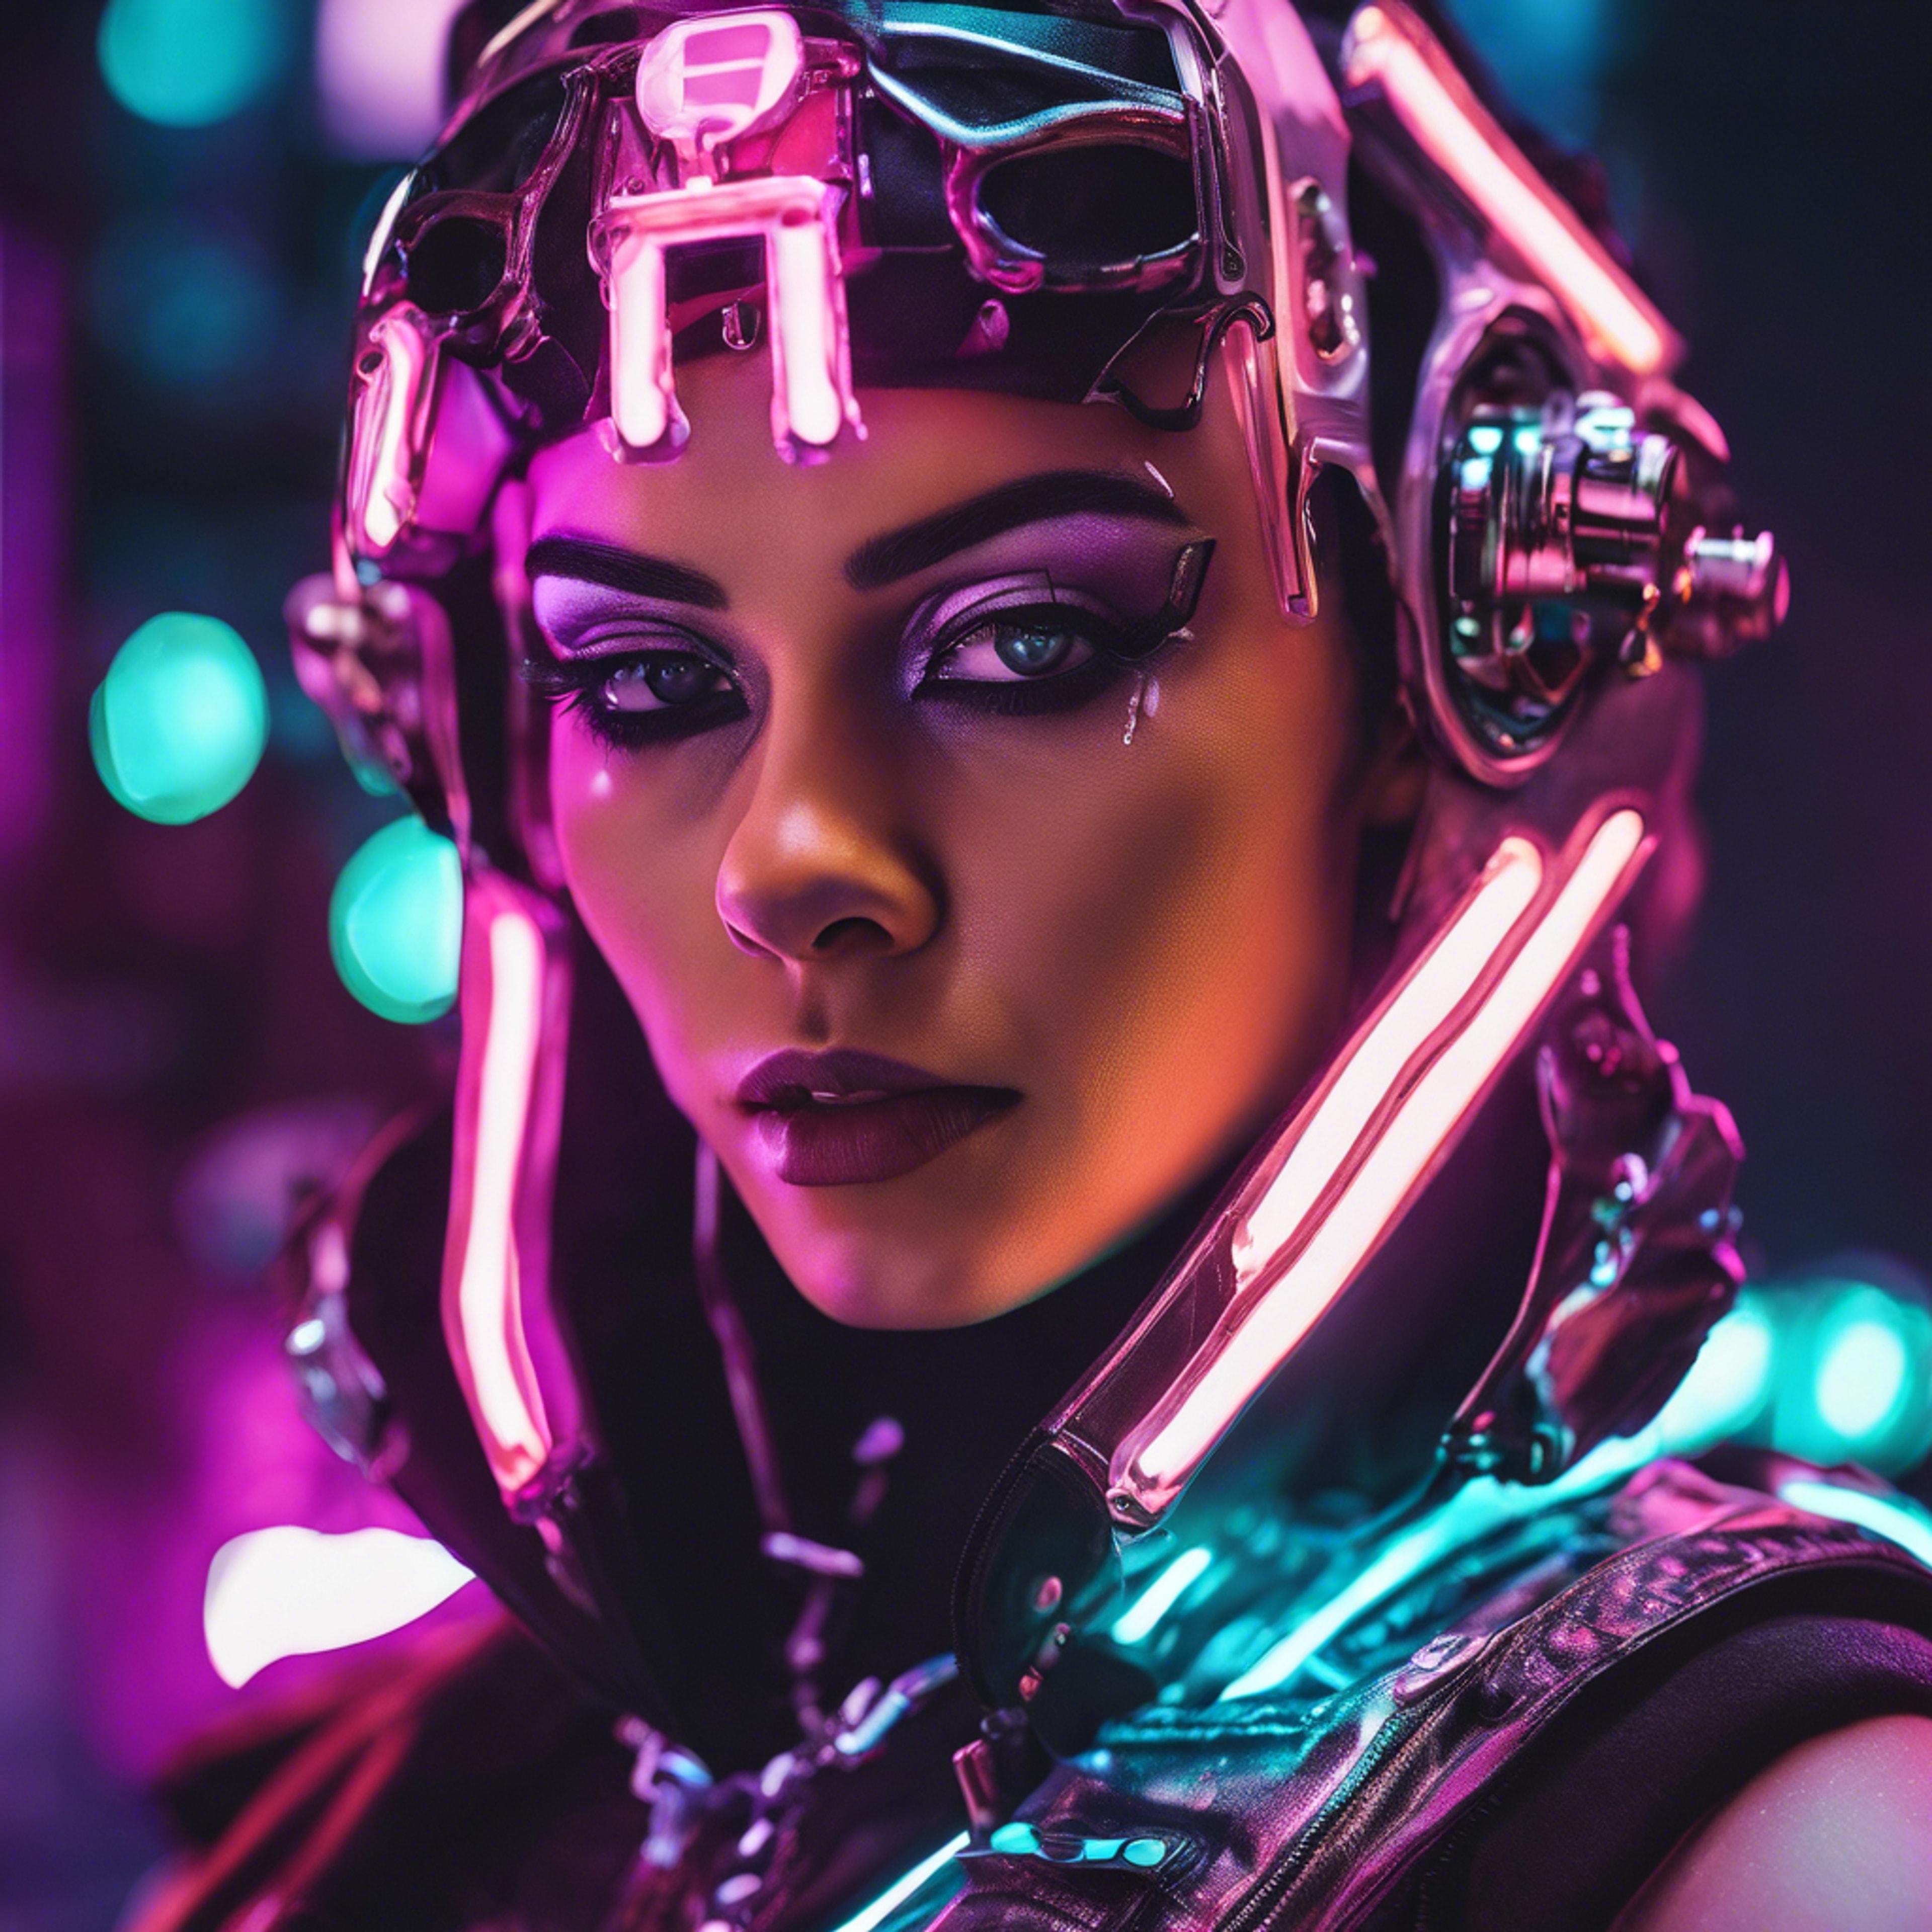 A close-up portrait of a cyberpunk baddie in neon lighting, metal piercings, and sci-fi-inspired makeup. Ταπετσαρία[9ac0123c92044077bebc]